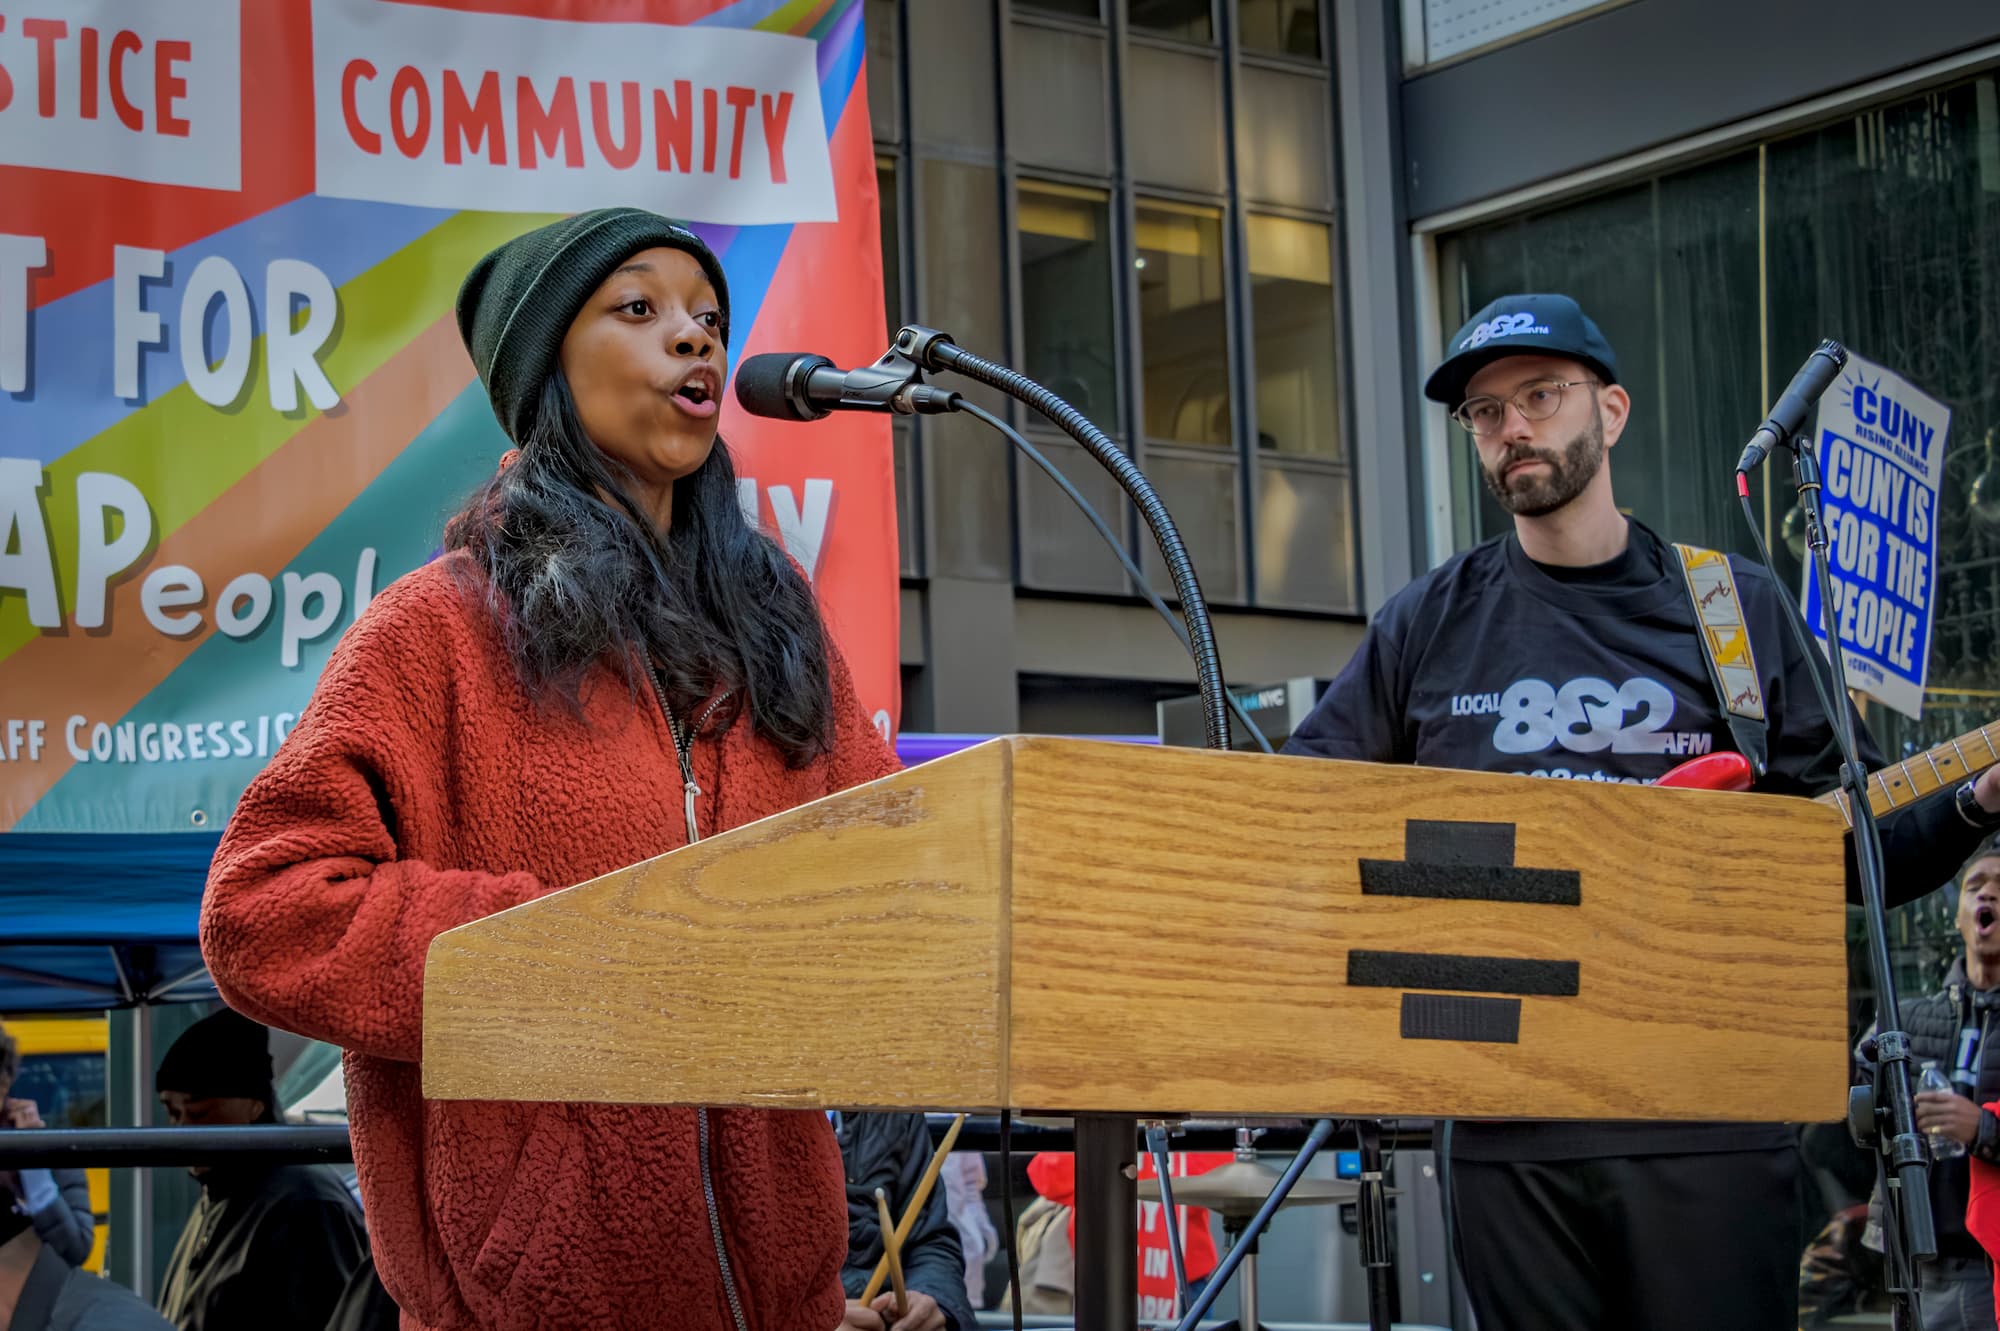 Zanayah Brown, a NYPIRG activist and Queensborough Community College, student speaking at the Sing Out Shout Out Rally for #APeoplesCUNY by Erik McGregor